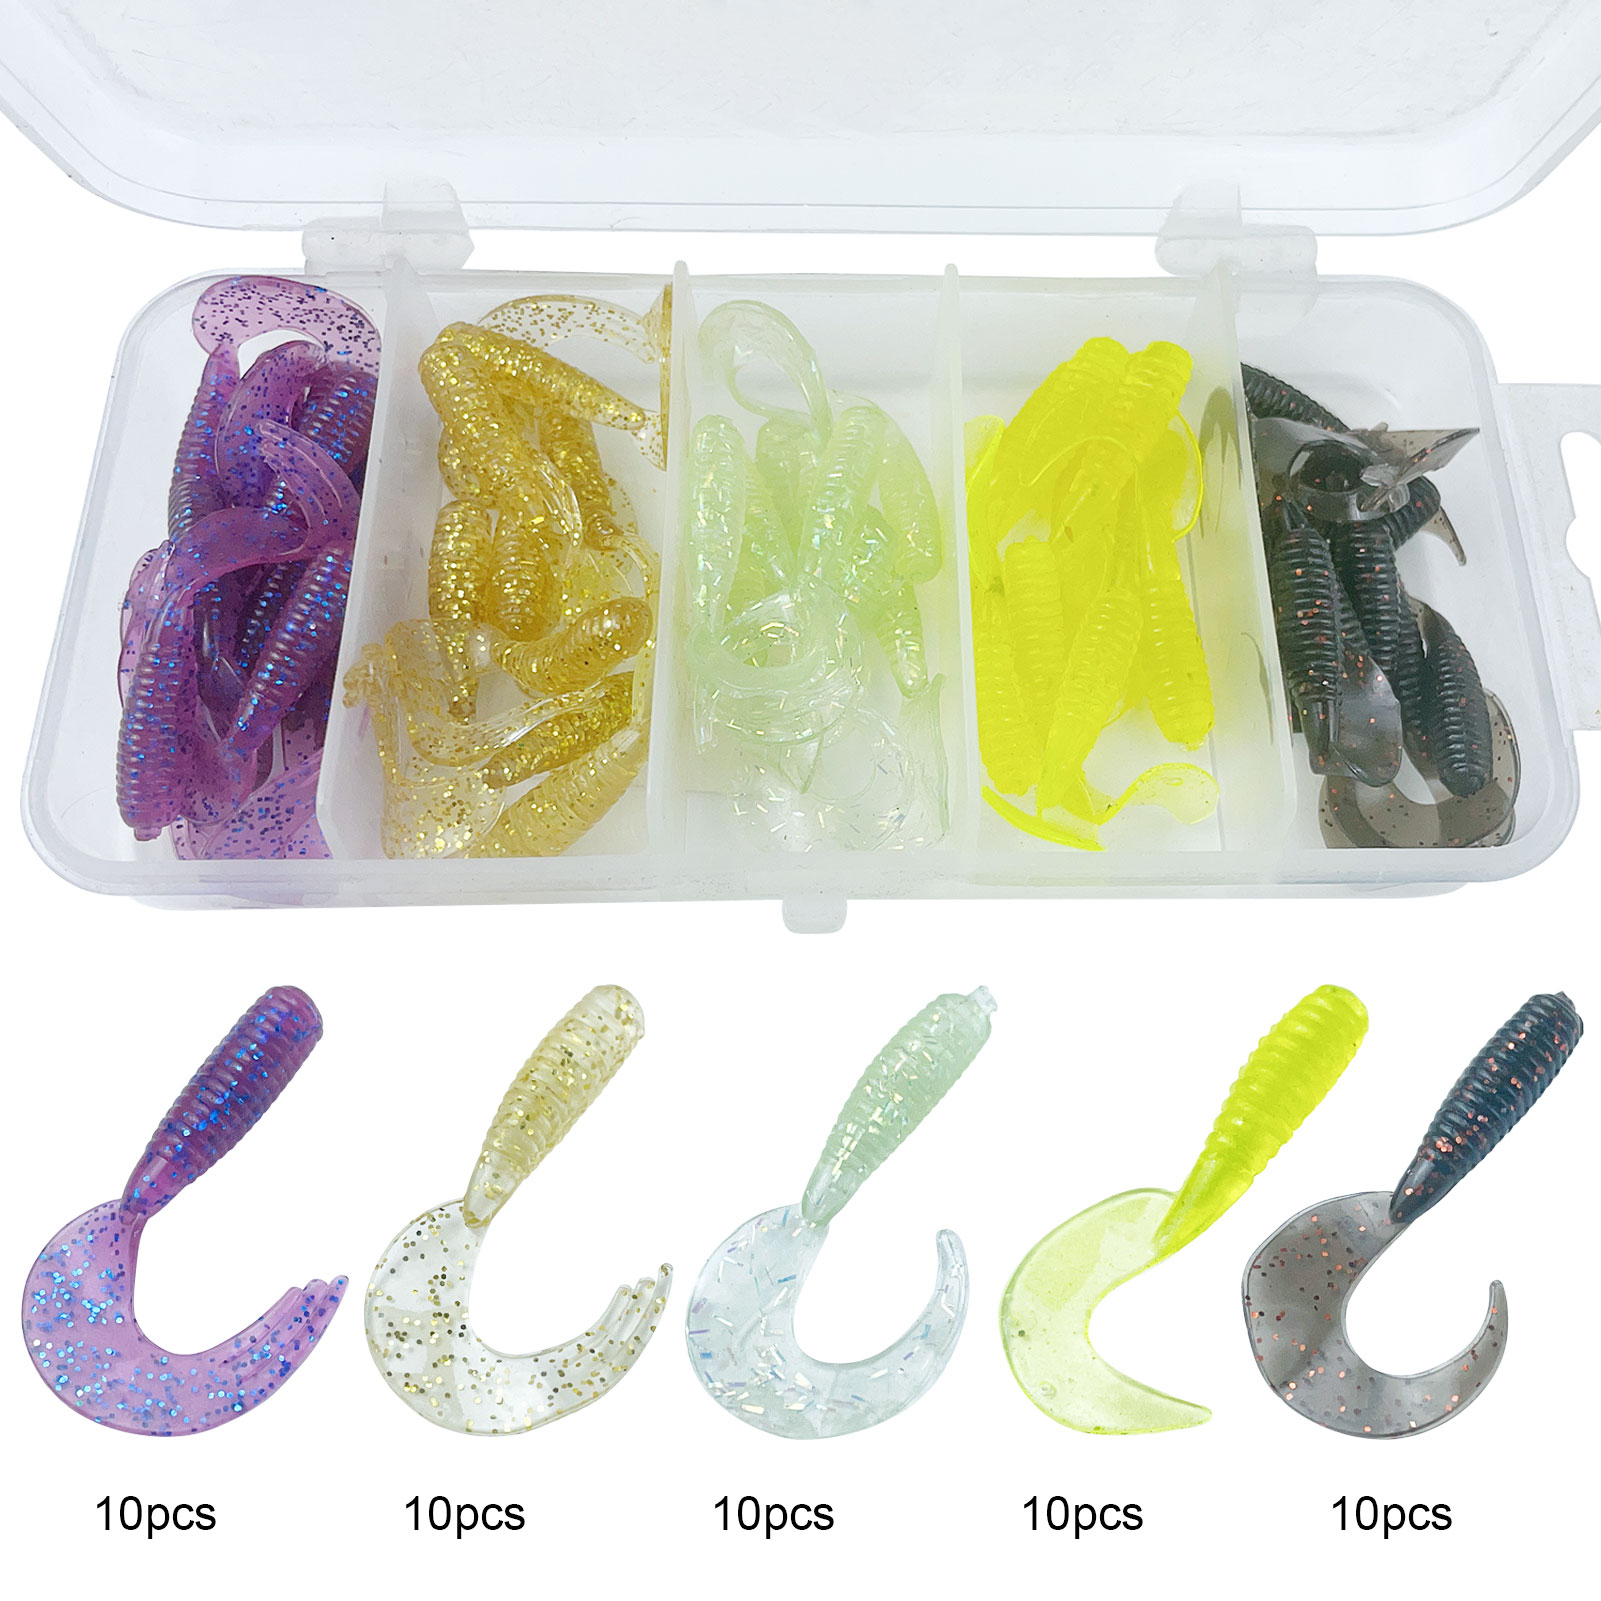 FREE FISHER 50pcs Soft Grub Worm Lures 4.5cm Rubber Fishing Maggot Baits Plastic Fishing Tackle Box Artificial Bass Wobblers with T-tail